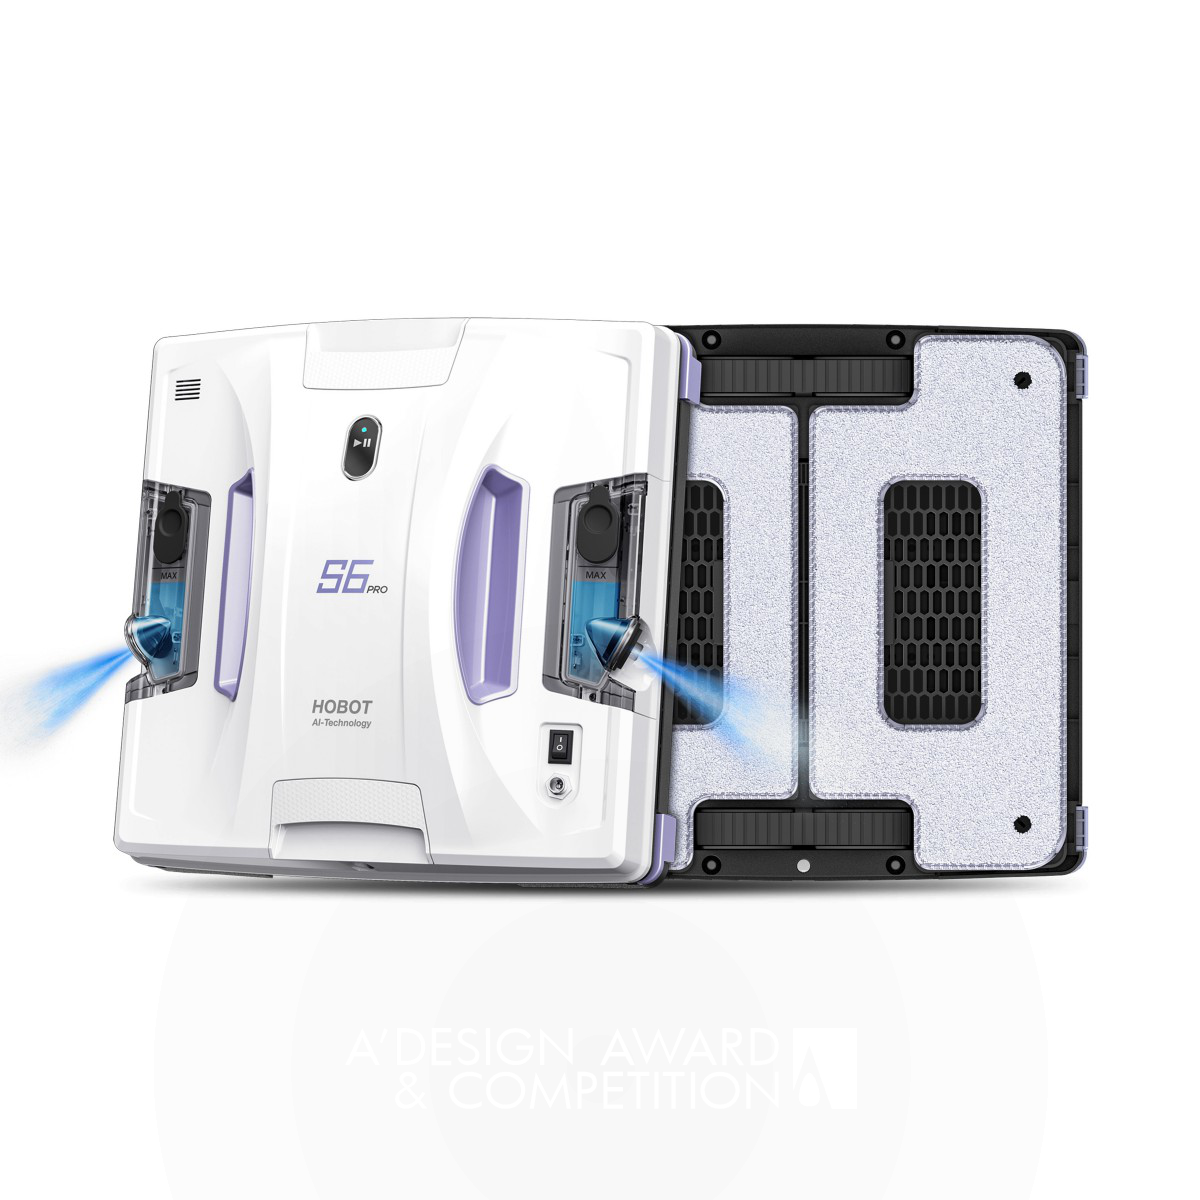 Hobot S6 Pro  Window Cleaning Robot by Hobot Technology Inc 